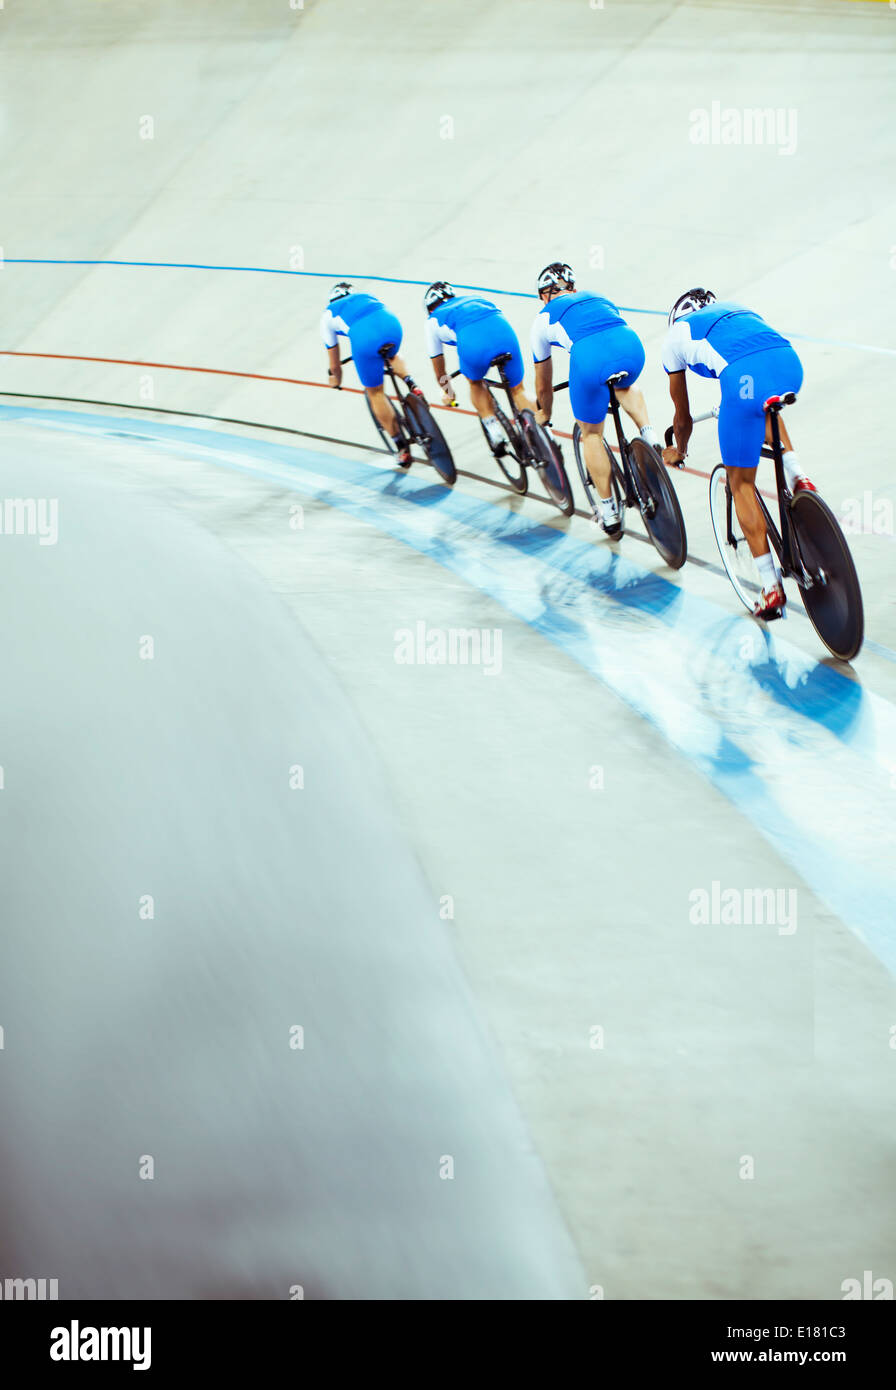 Track cycling team riding in velodrome Stock Photo